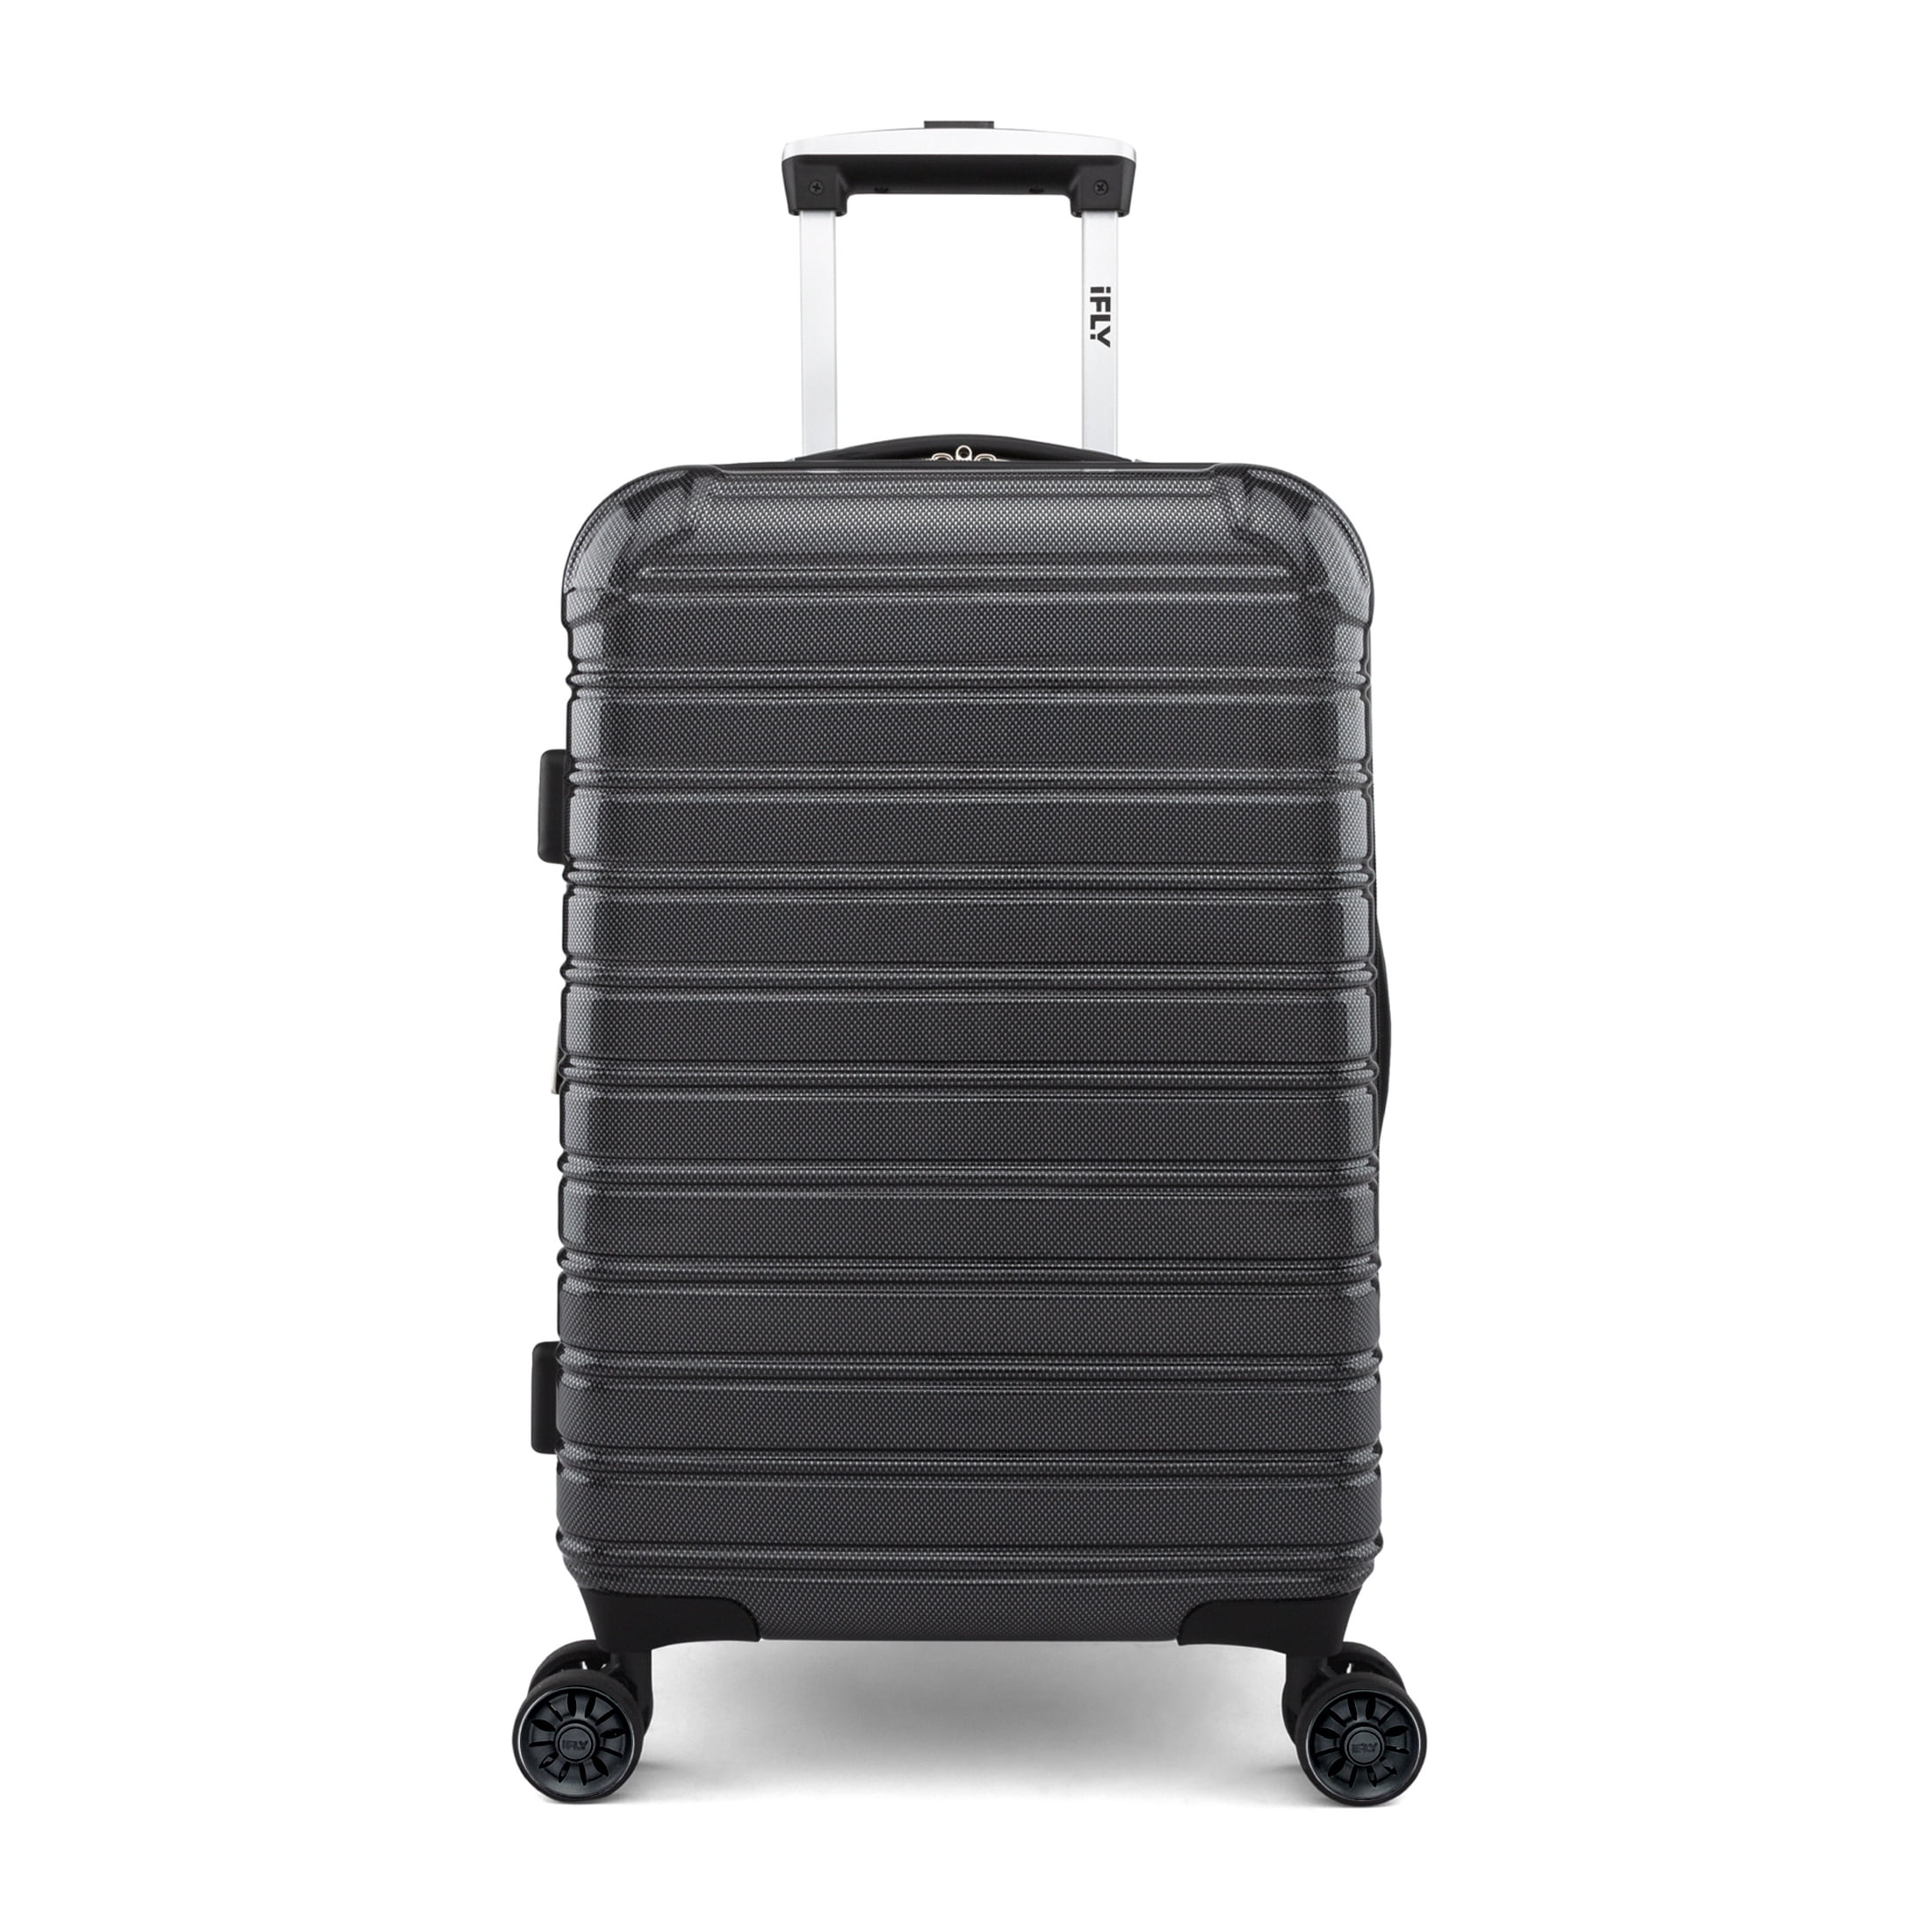 Best Carry On Luggage Under 100 (Tested on Cobblestone Streets)